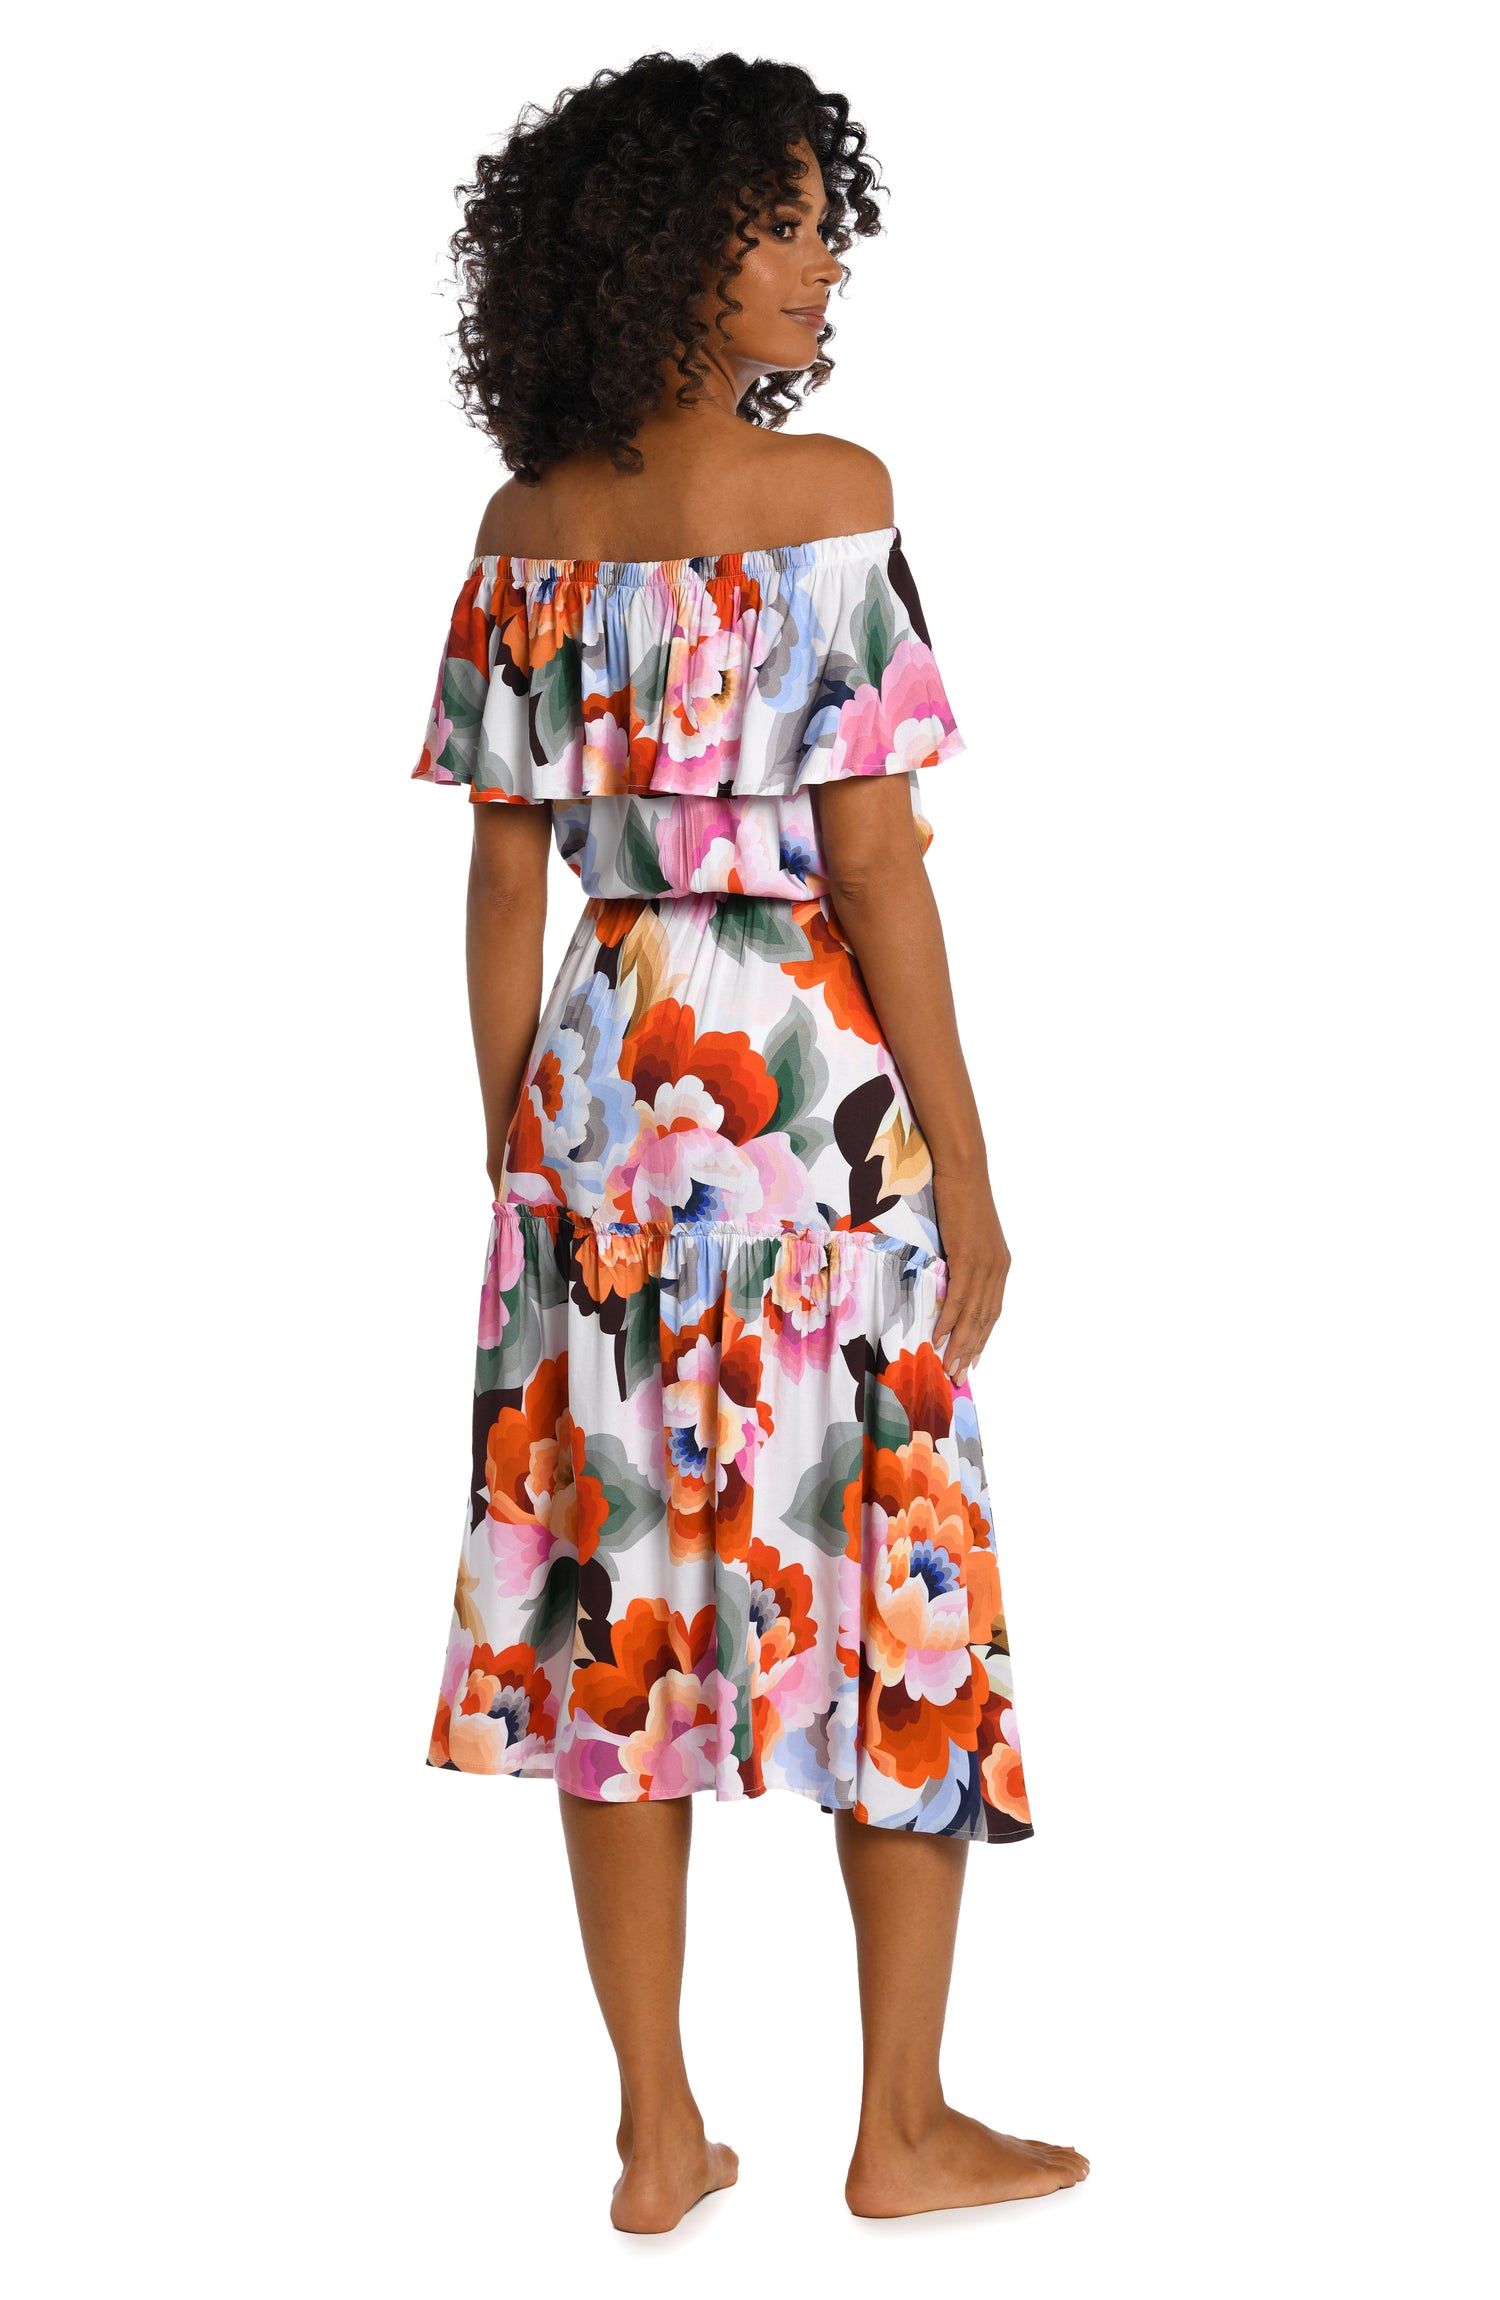 Model is wearing a multi colored floral printed off shoulder cover up dress from our Floral Rhythm collection!